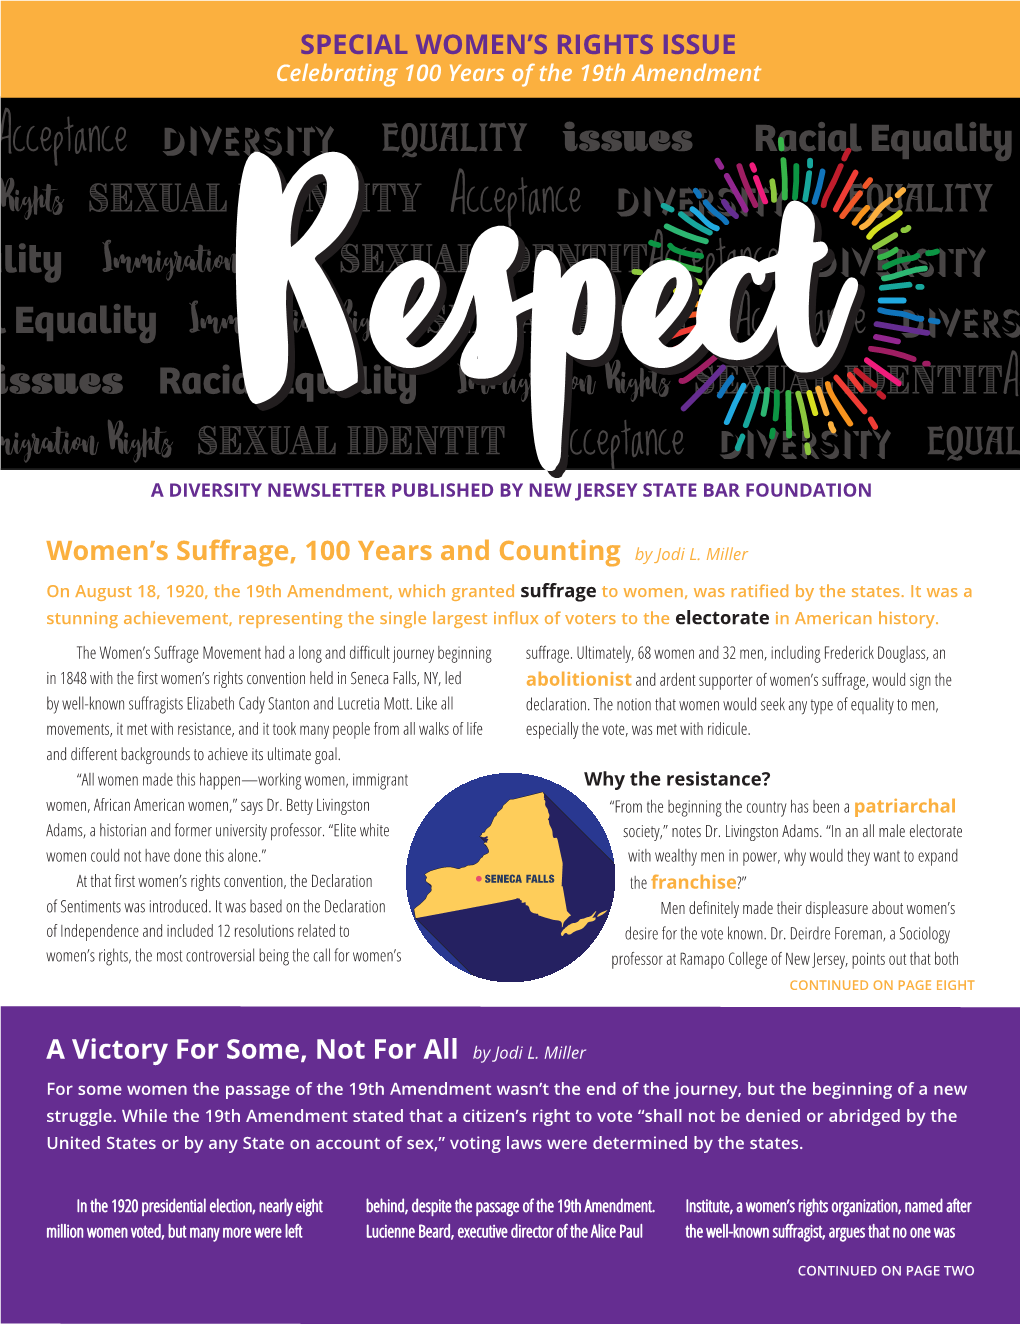 Respect's Special Women's Rights Issue